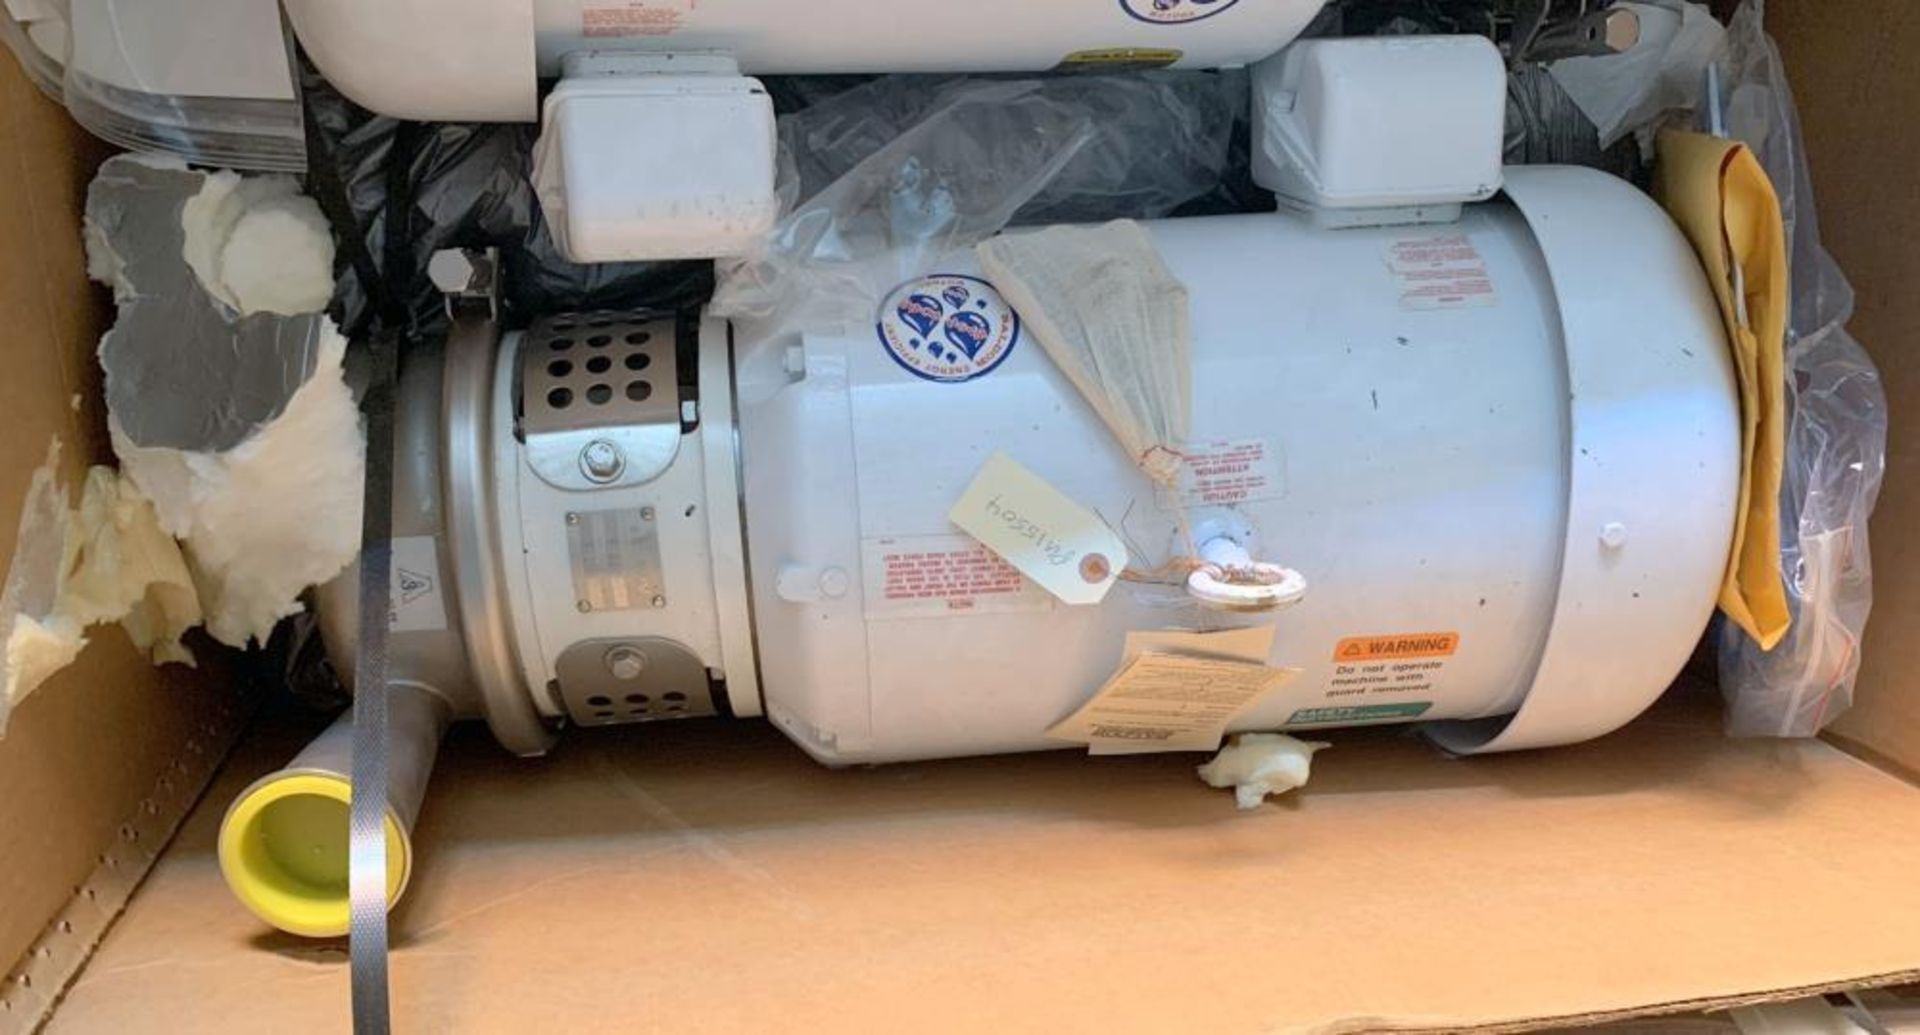 Unused- APV Model W 30/50 Centrifugal Pump, Stainless Steel. Approximate 280 gallons per minute, 130